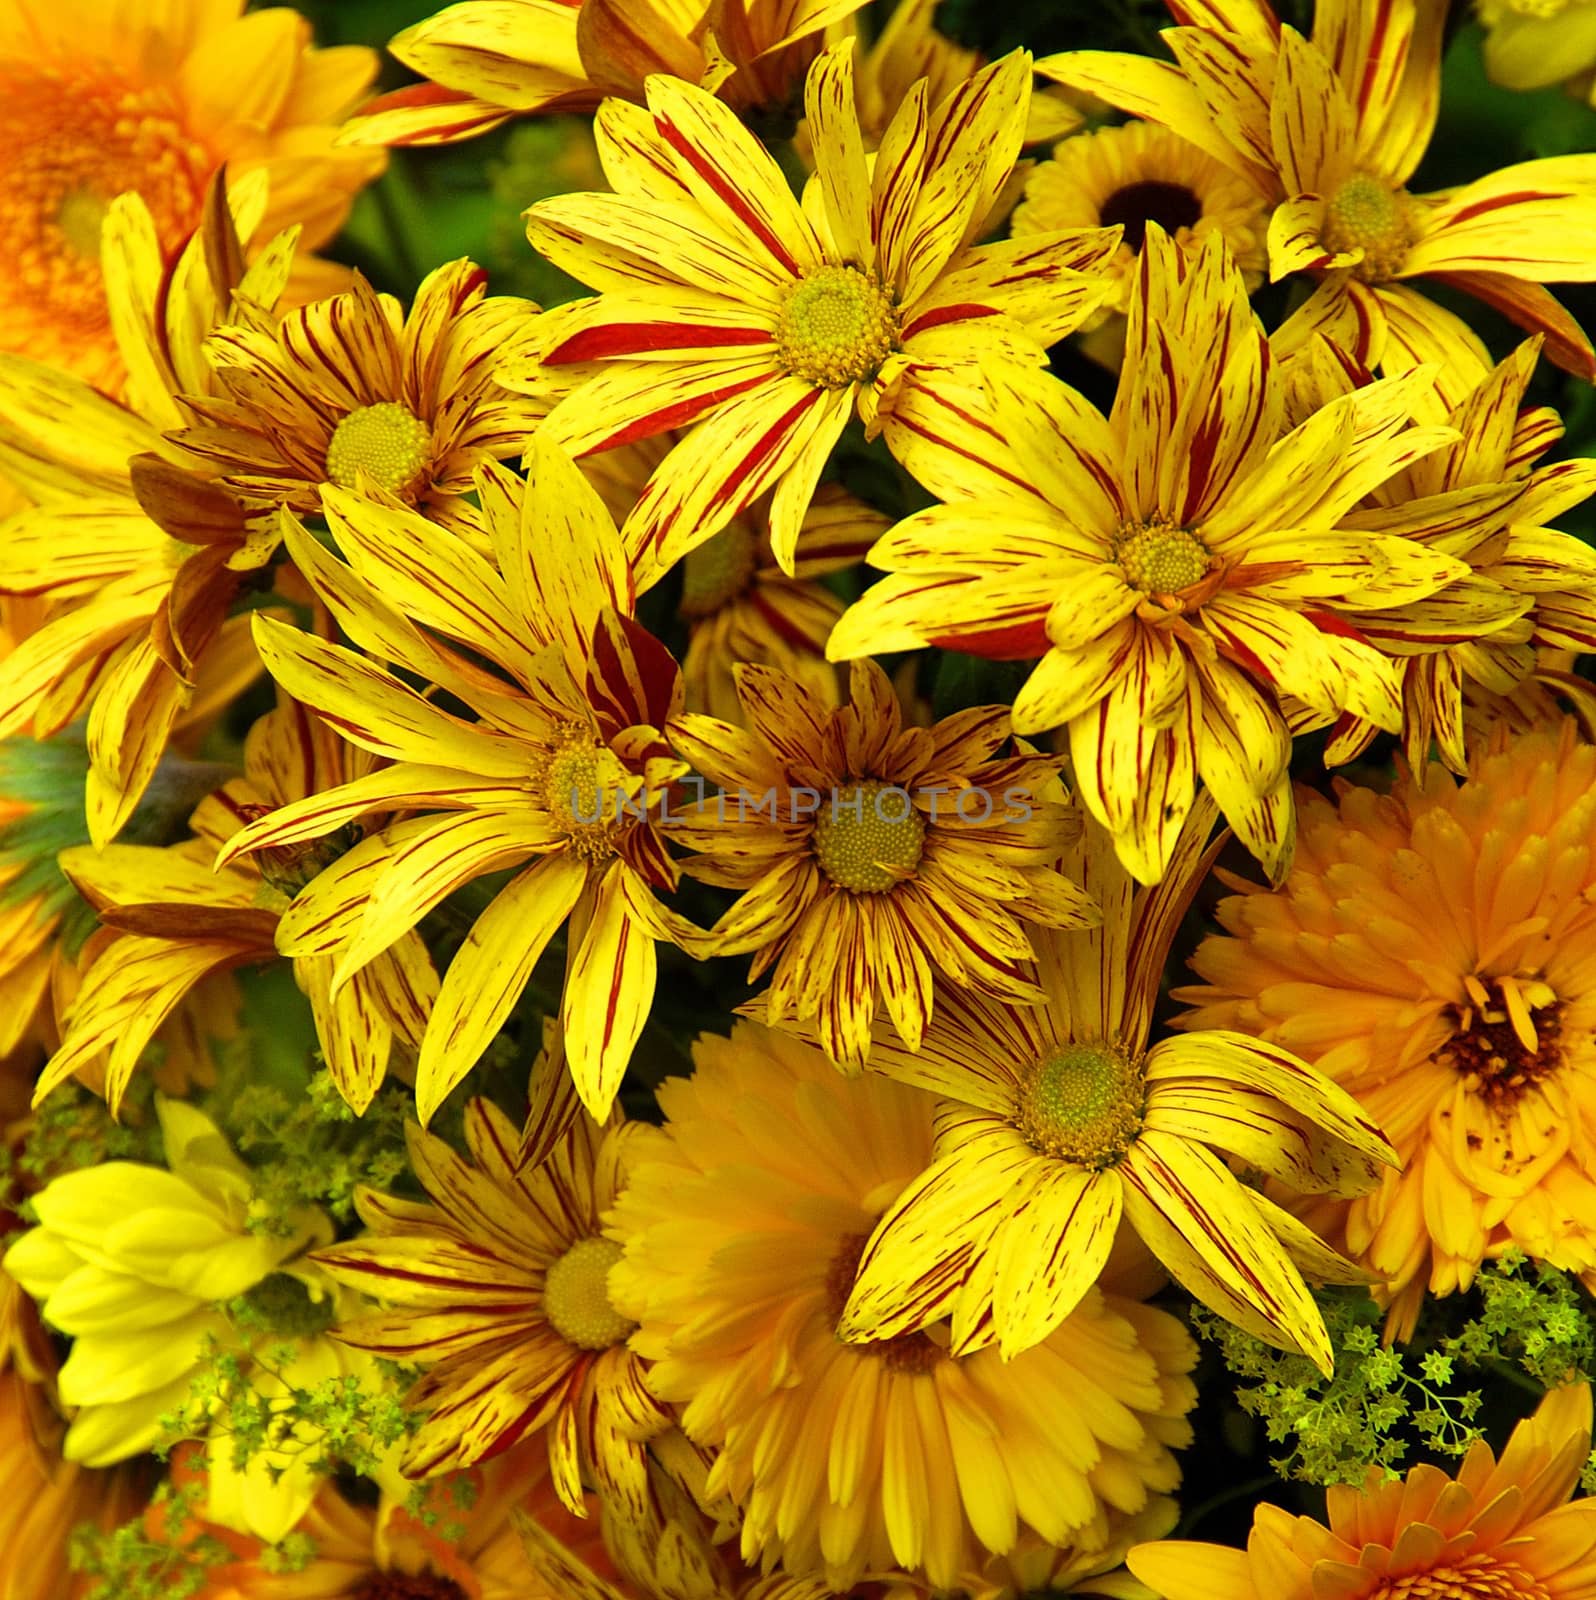 RED AND YELLOW DAISIES.

Floral arrangement of vibrant 